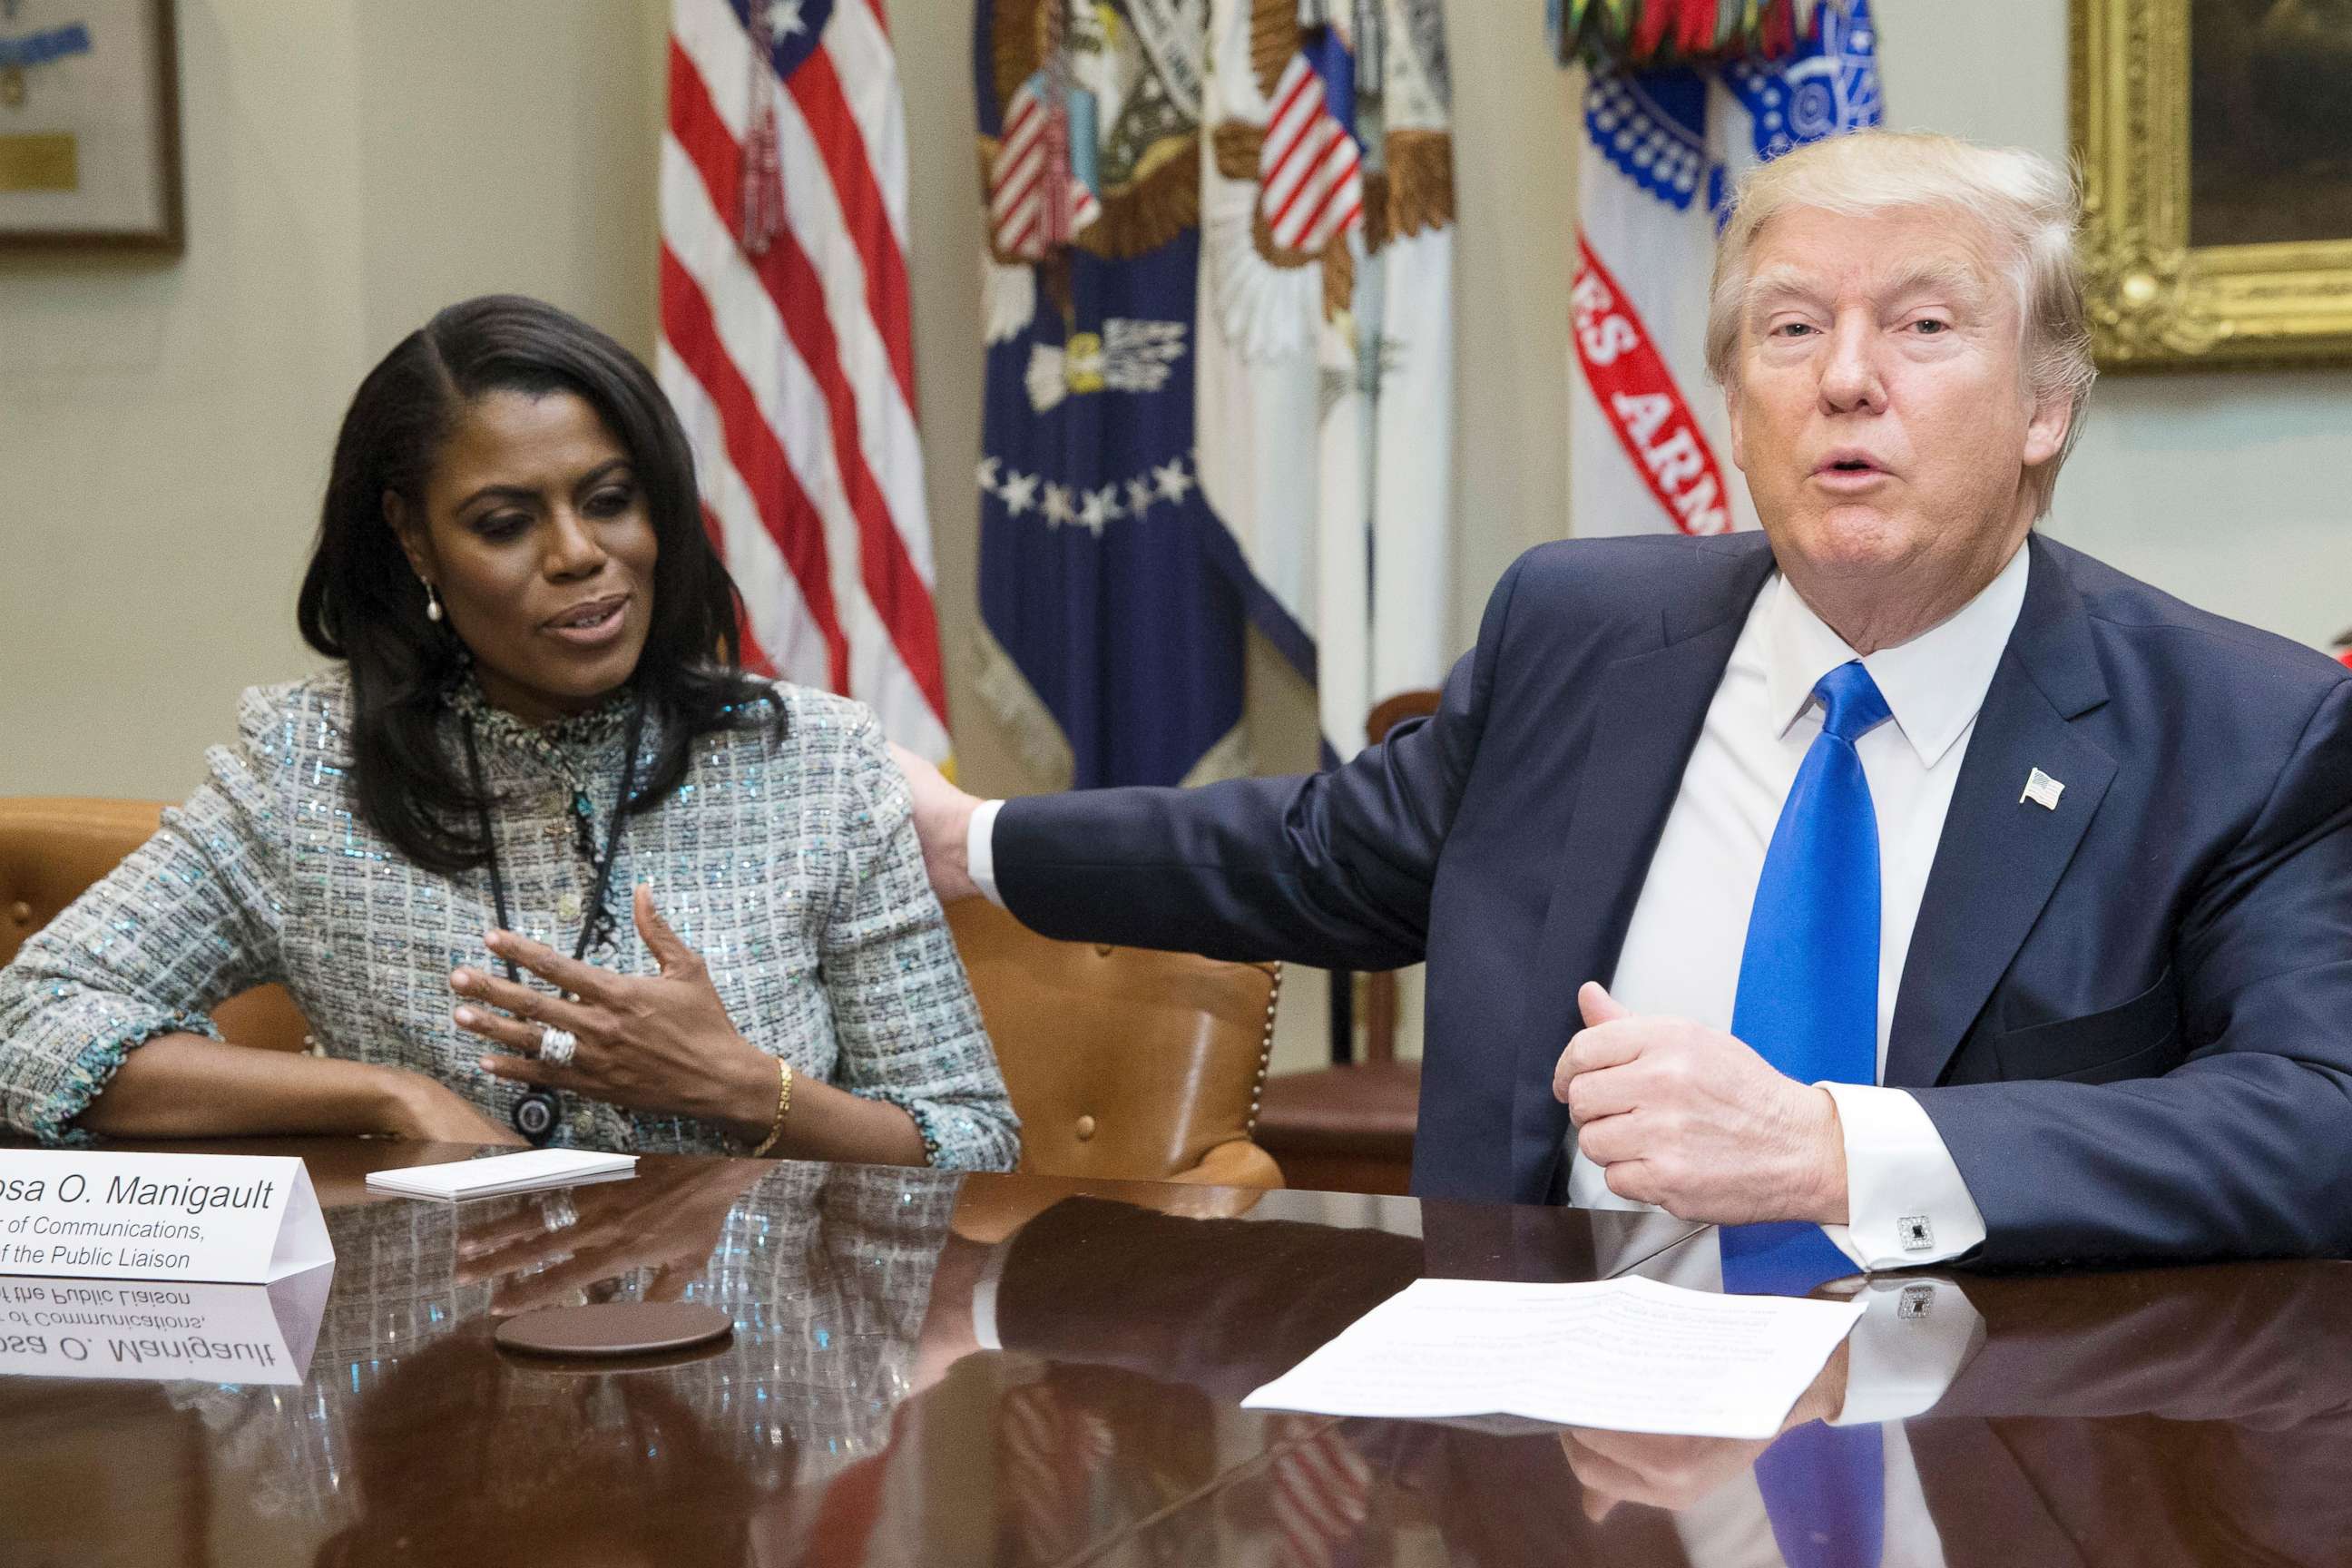 PHOTO: President Donald Trump speaks beside Omarosa Manigault-Newman during a meeting on African American History Month in the Roosevelt Room of the White House, Feb. 1, 2017.